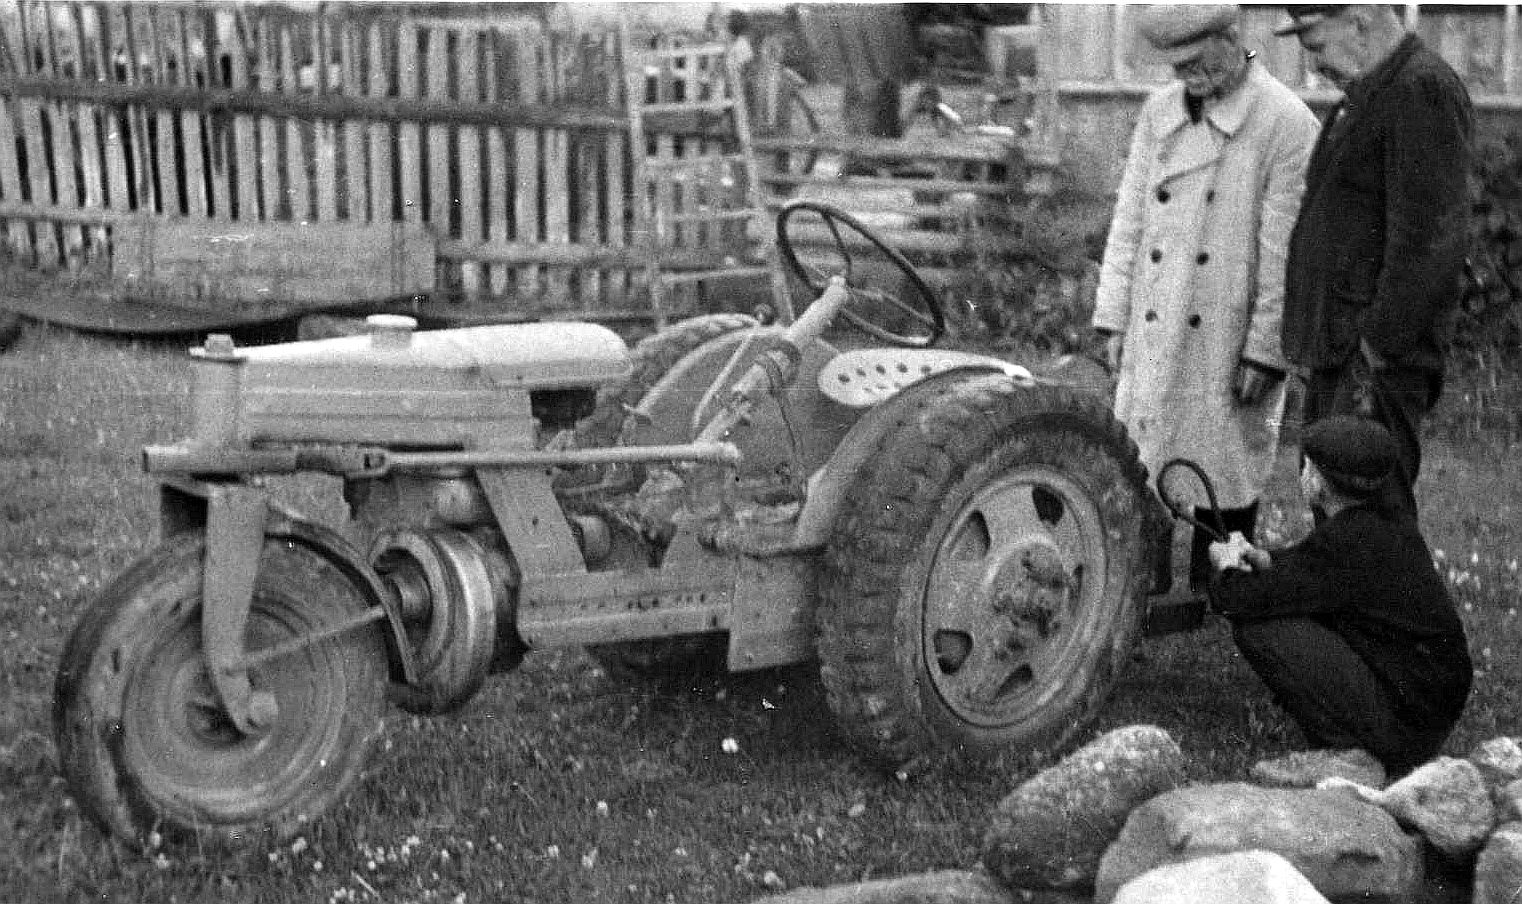 Self-made tractor 1962.